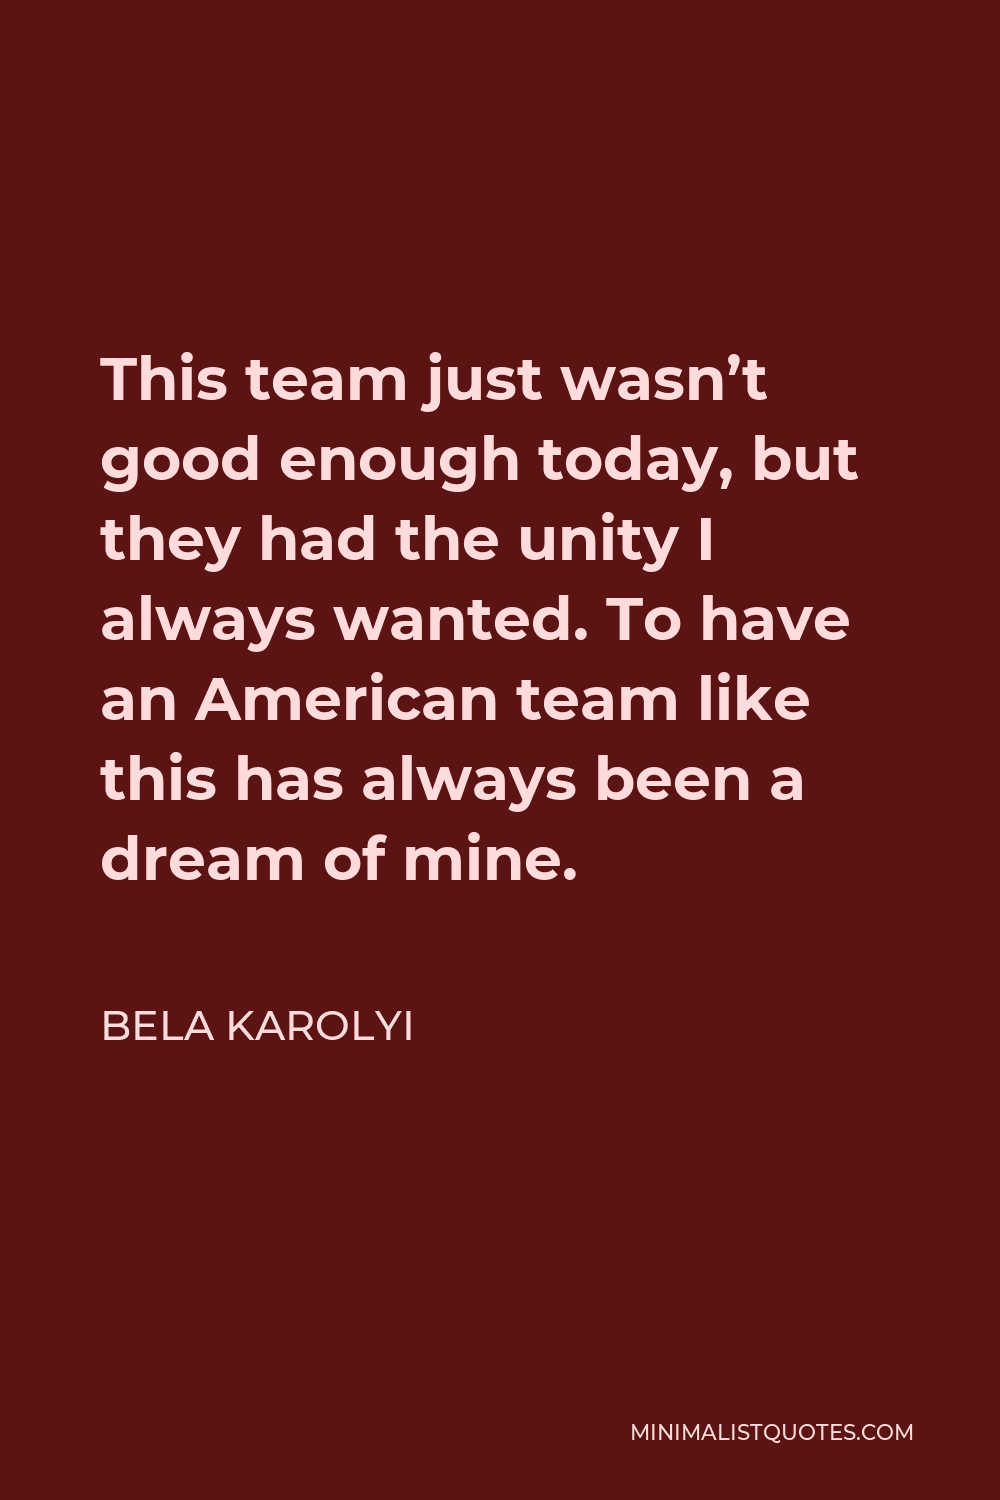 Bela Karolyi Quote - This team just wasn’t good enough today, but they had the unity I always wanted. To have an American team like this has always been a dream of mine.